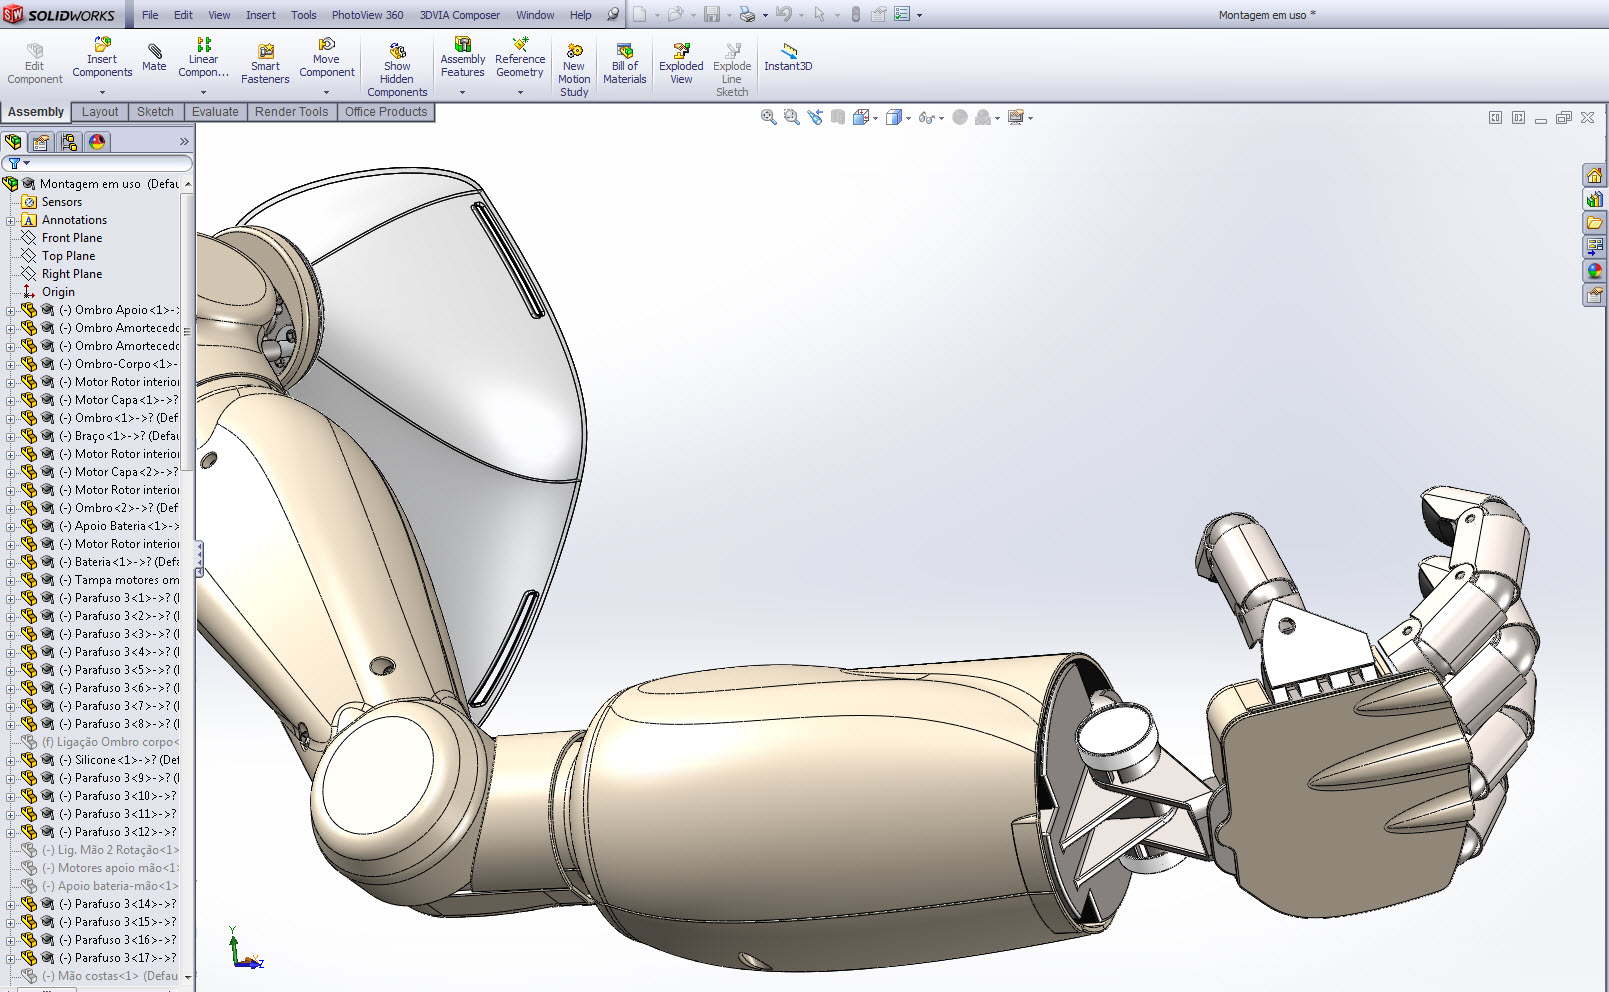 Vote for your favorite SolidWorks Student Design from Portugal